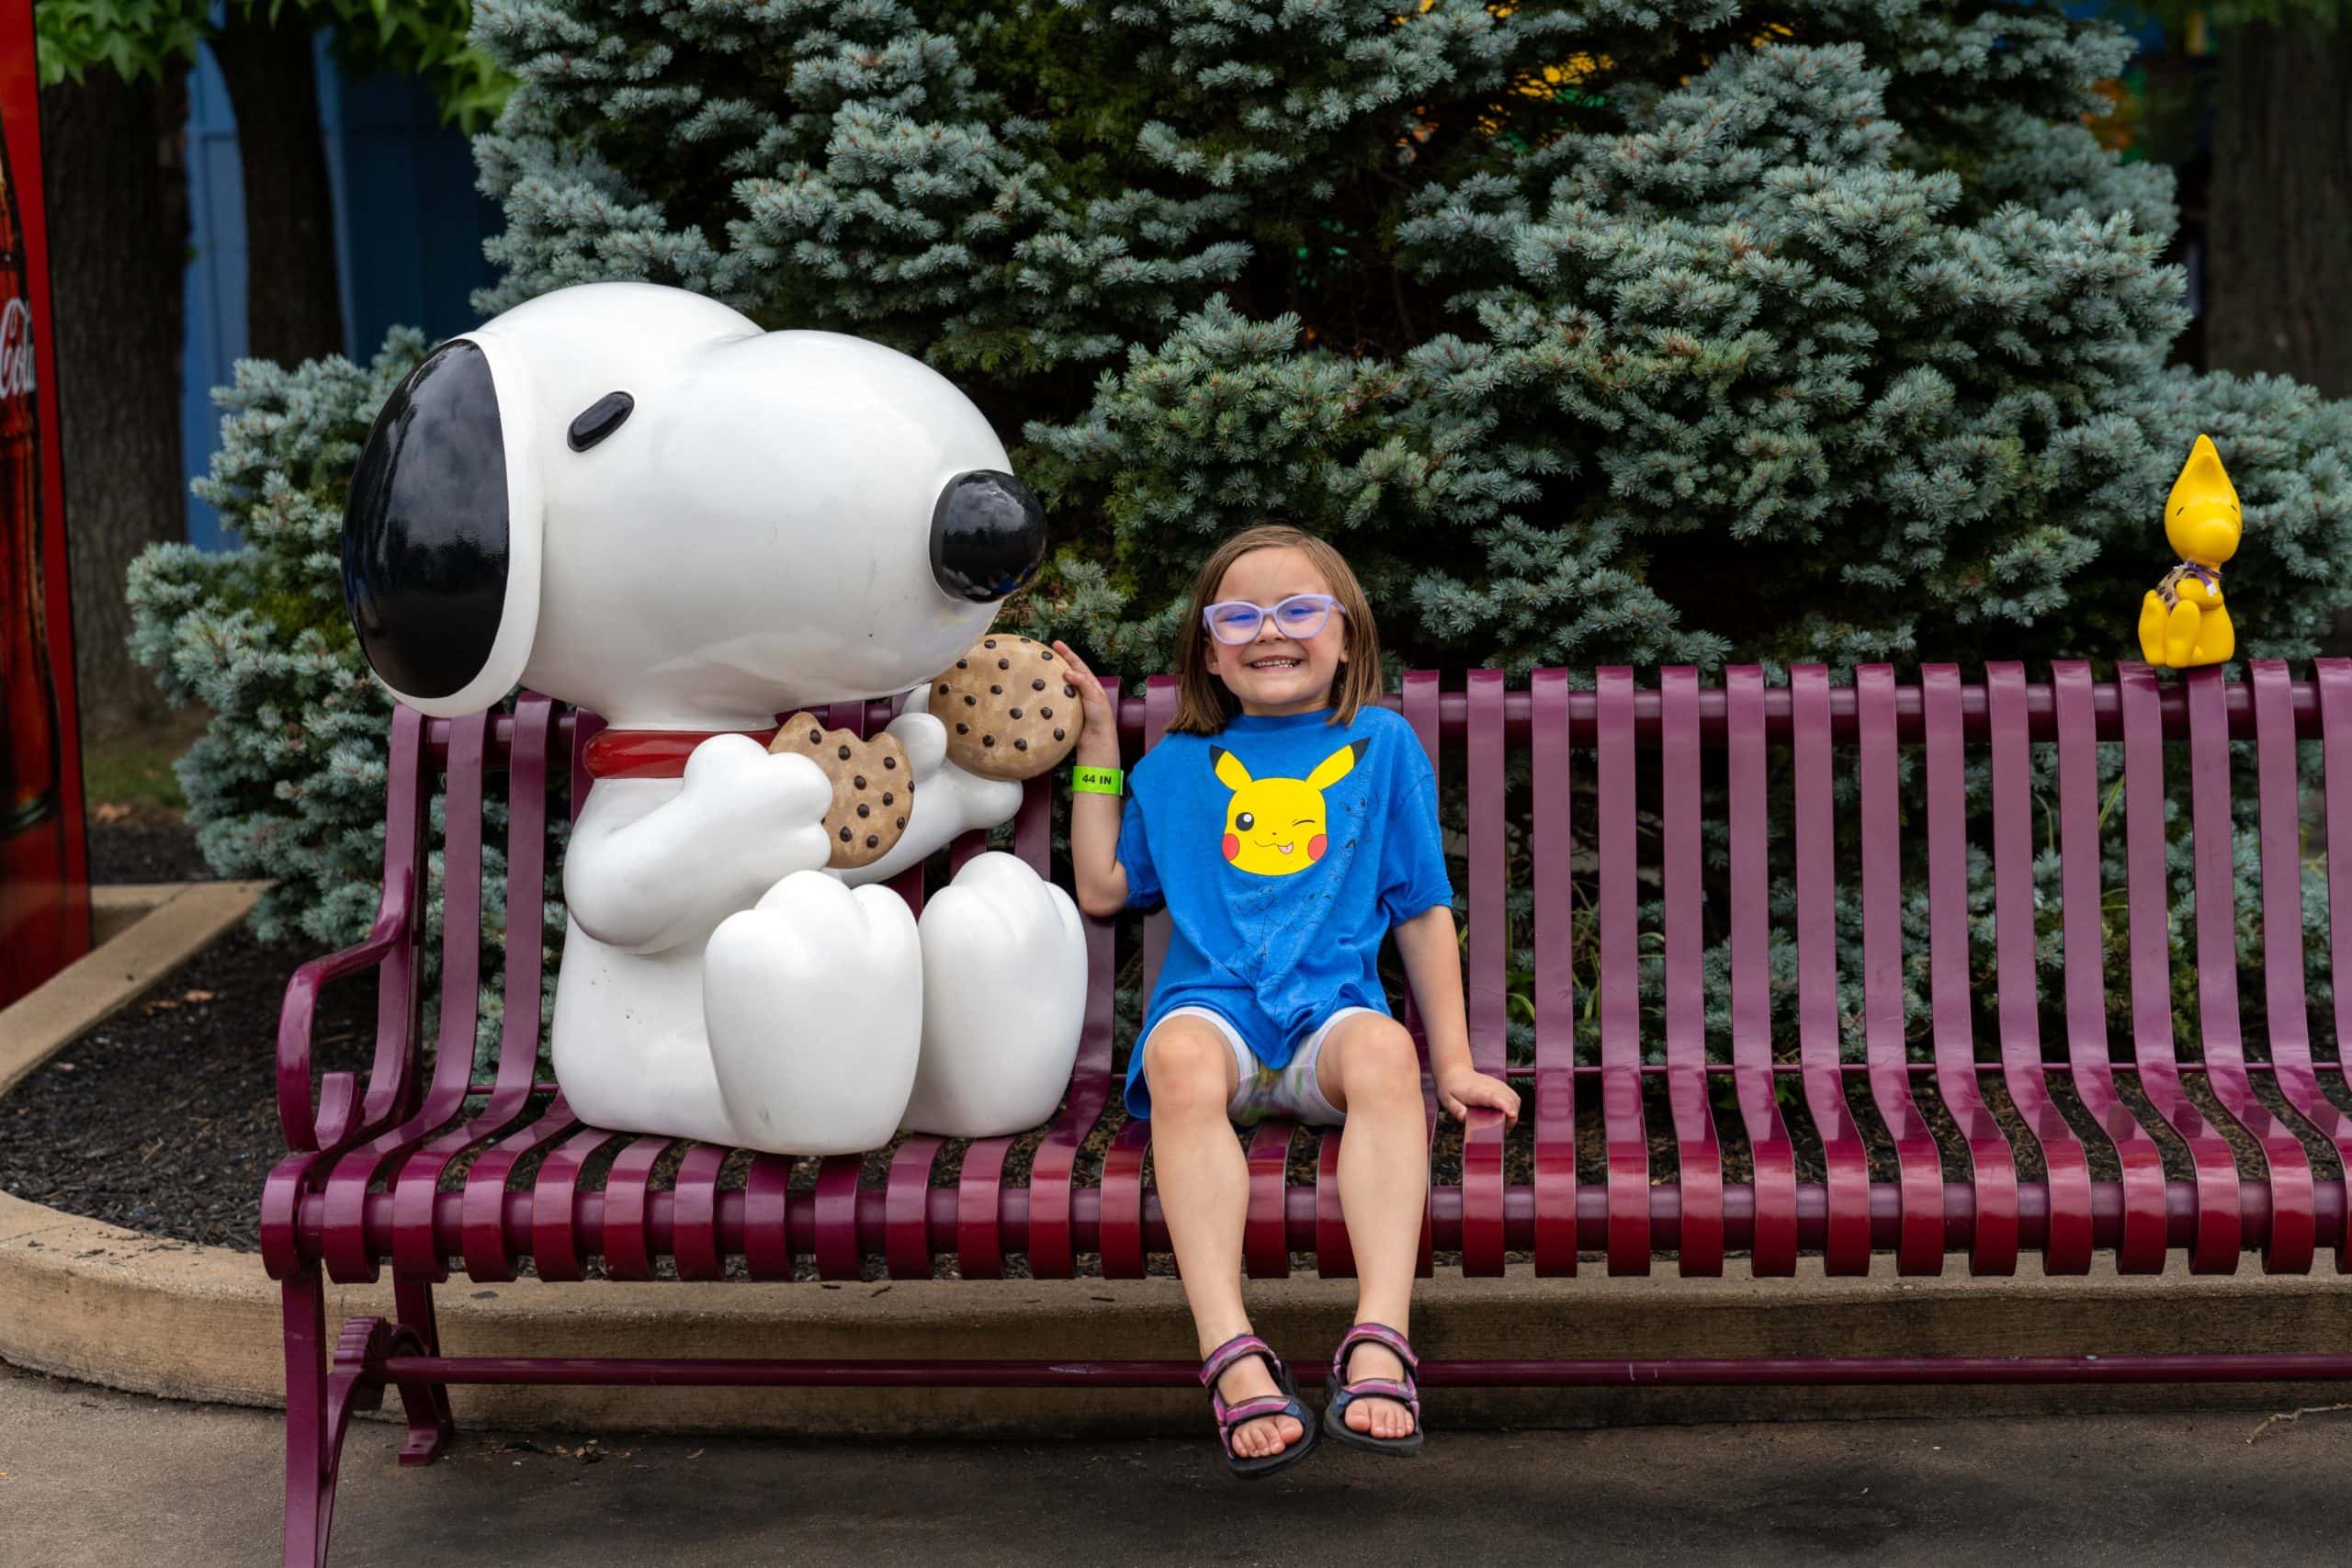 Young girl with Snoopy at Planet Snoopy at Kings Island in Mason, Ohio.